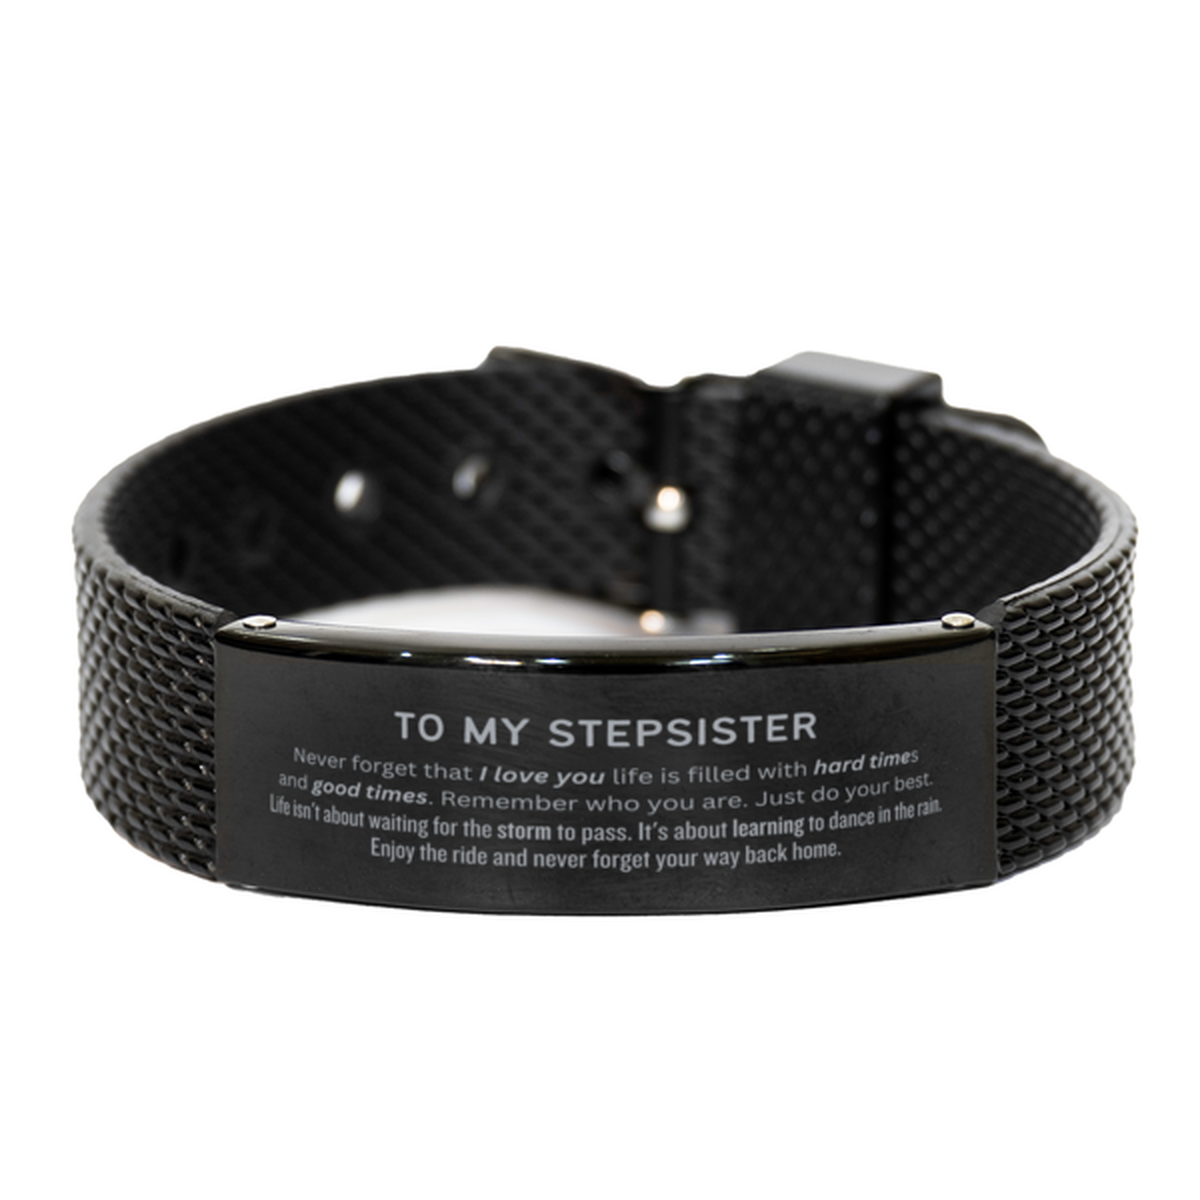 Christmas Stepsister Black Shark Mesh Bracelet Gifts, To My Stepsister Birthday Thank You Gifts For Stepsister, Graduation Unique Gifts For Stepsister To My Stepsister Never forget that I love you life is filled with hard times and good times. Remember wh